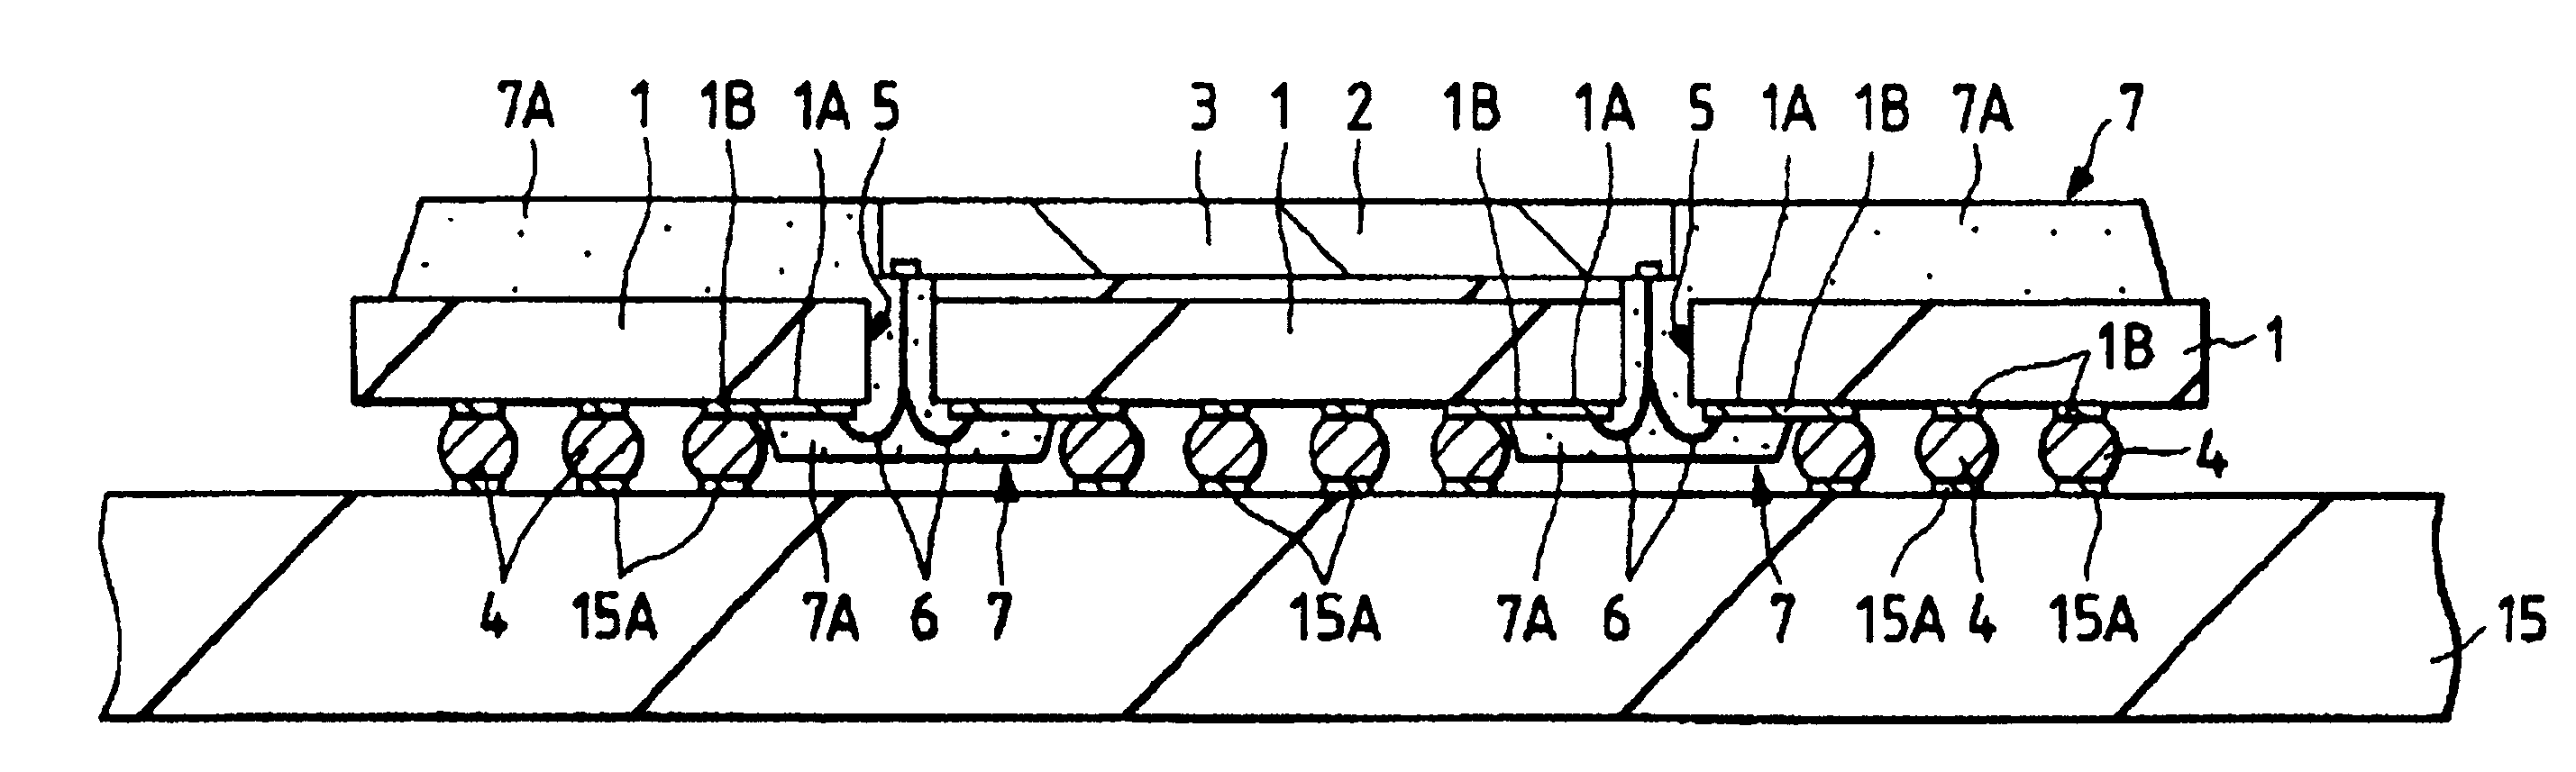 Semiconductor device having an improved connected arrangement between a semiconductor pellet and base substrate electrodes